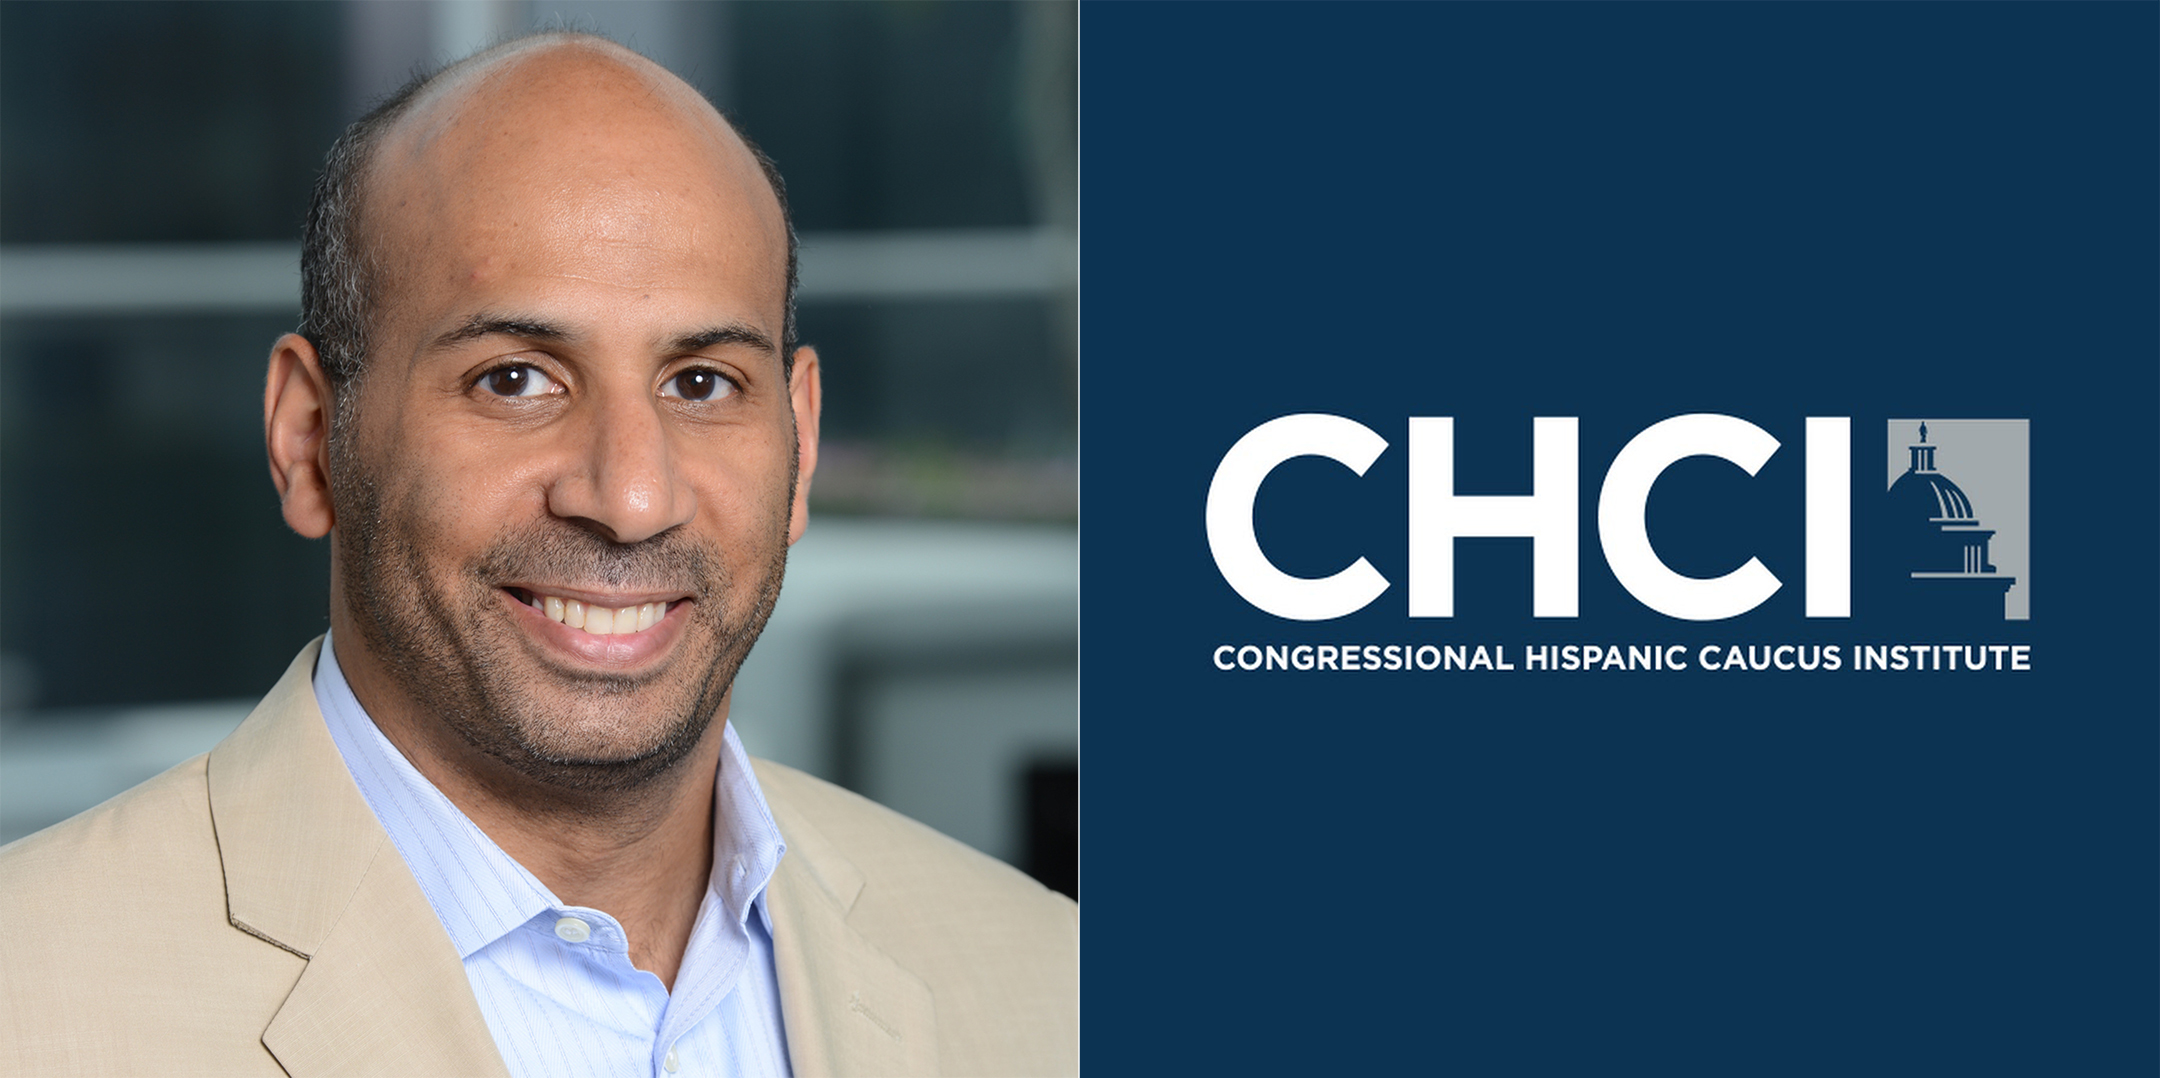 Photo of Marco Davis on the left next to the Congressional Hispanic Caucus Institute's logo rendered in white text on a blue background